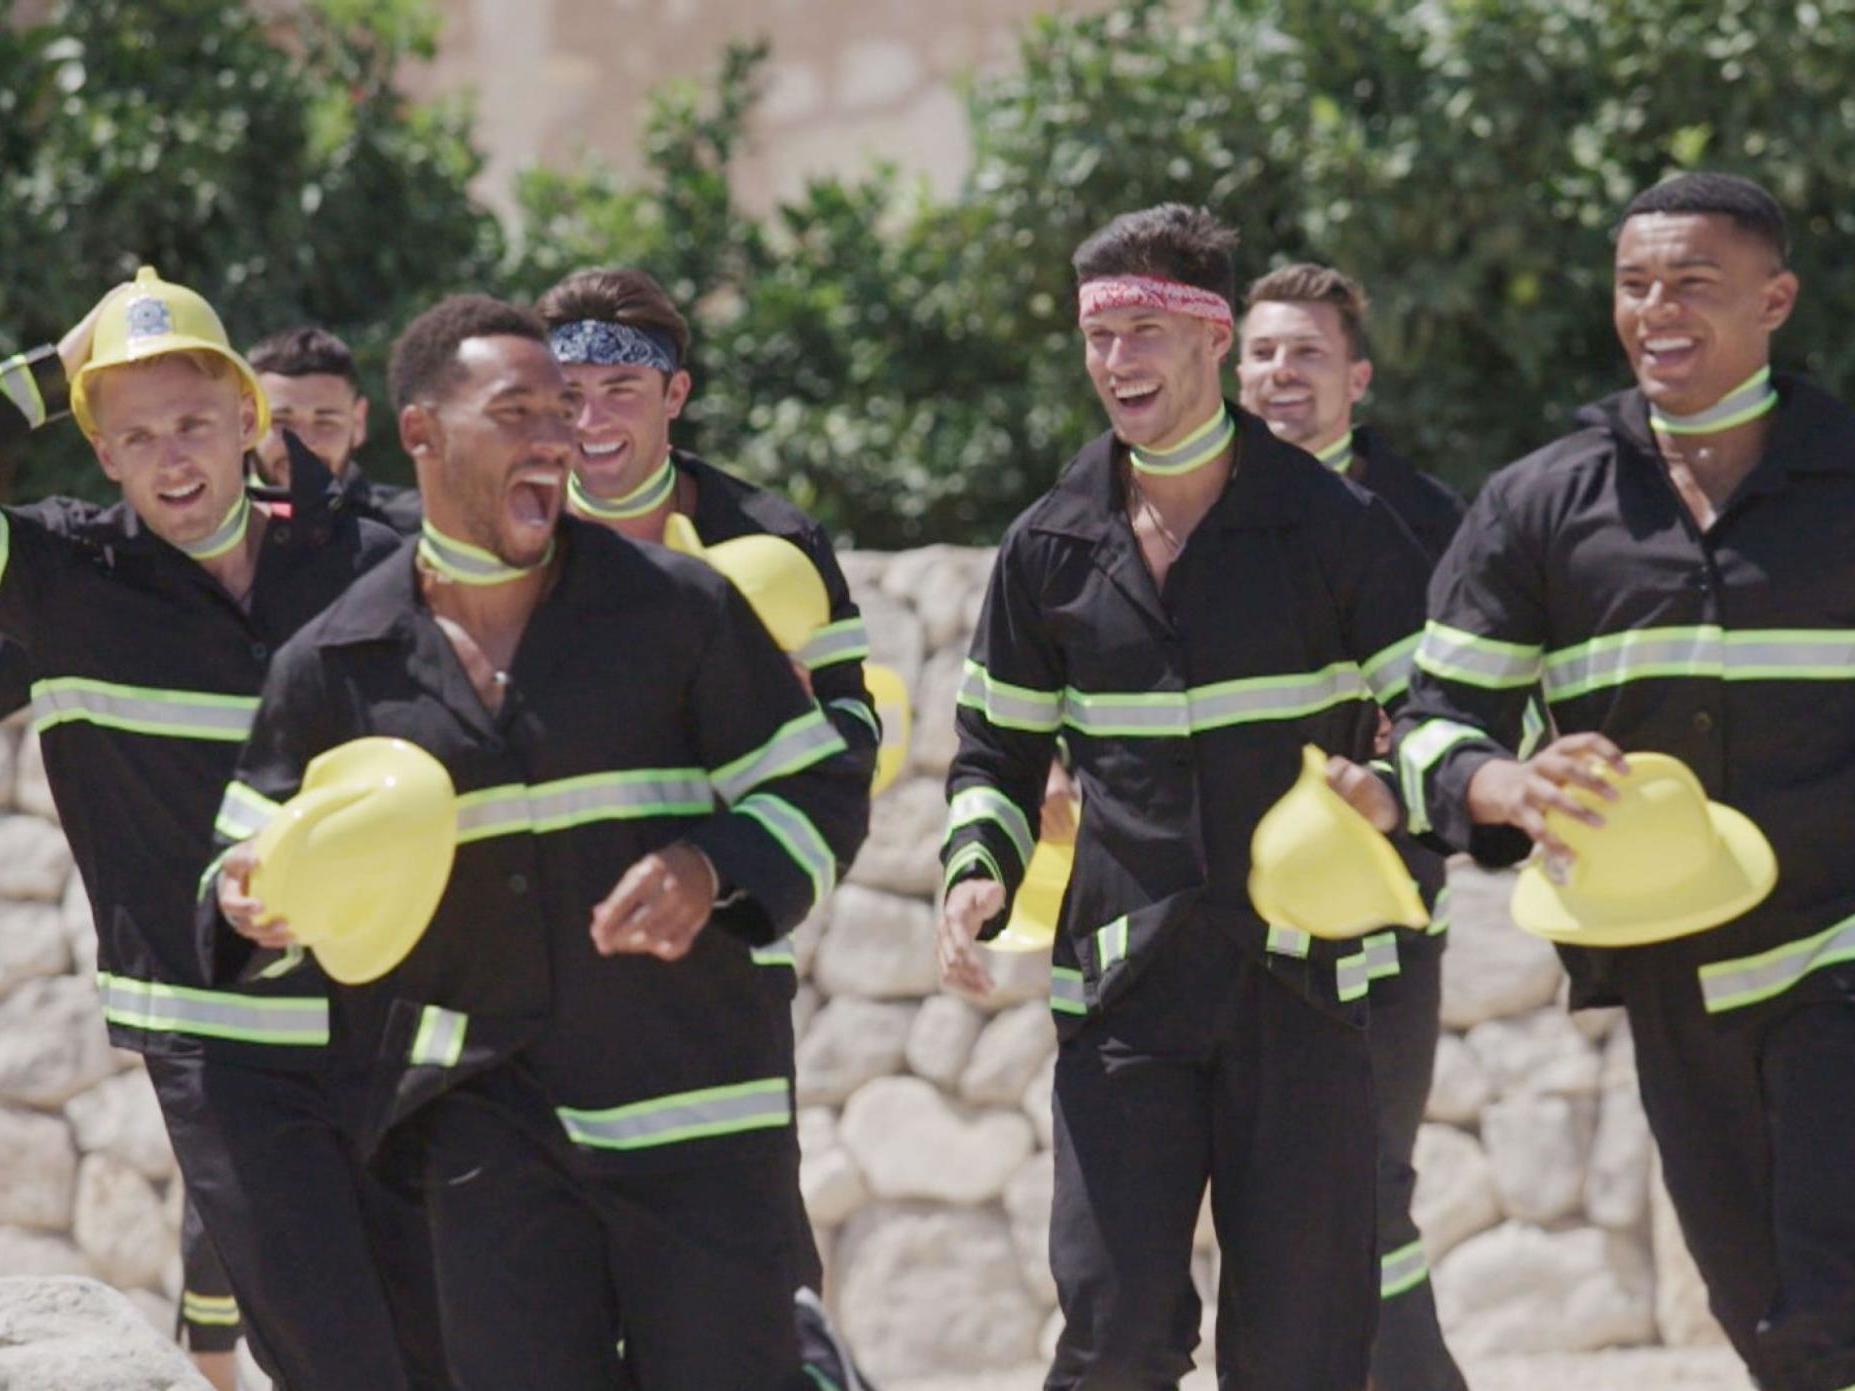 The 'sexist' portrayal of firefighters on Love Island has been criticised by the London Fire Brigade